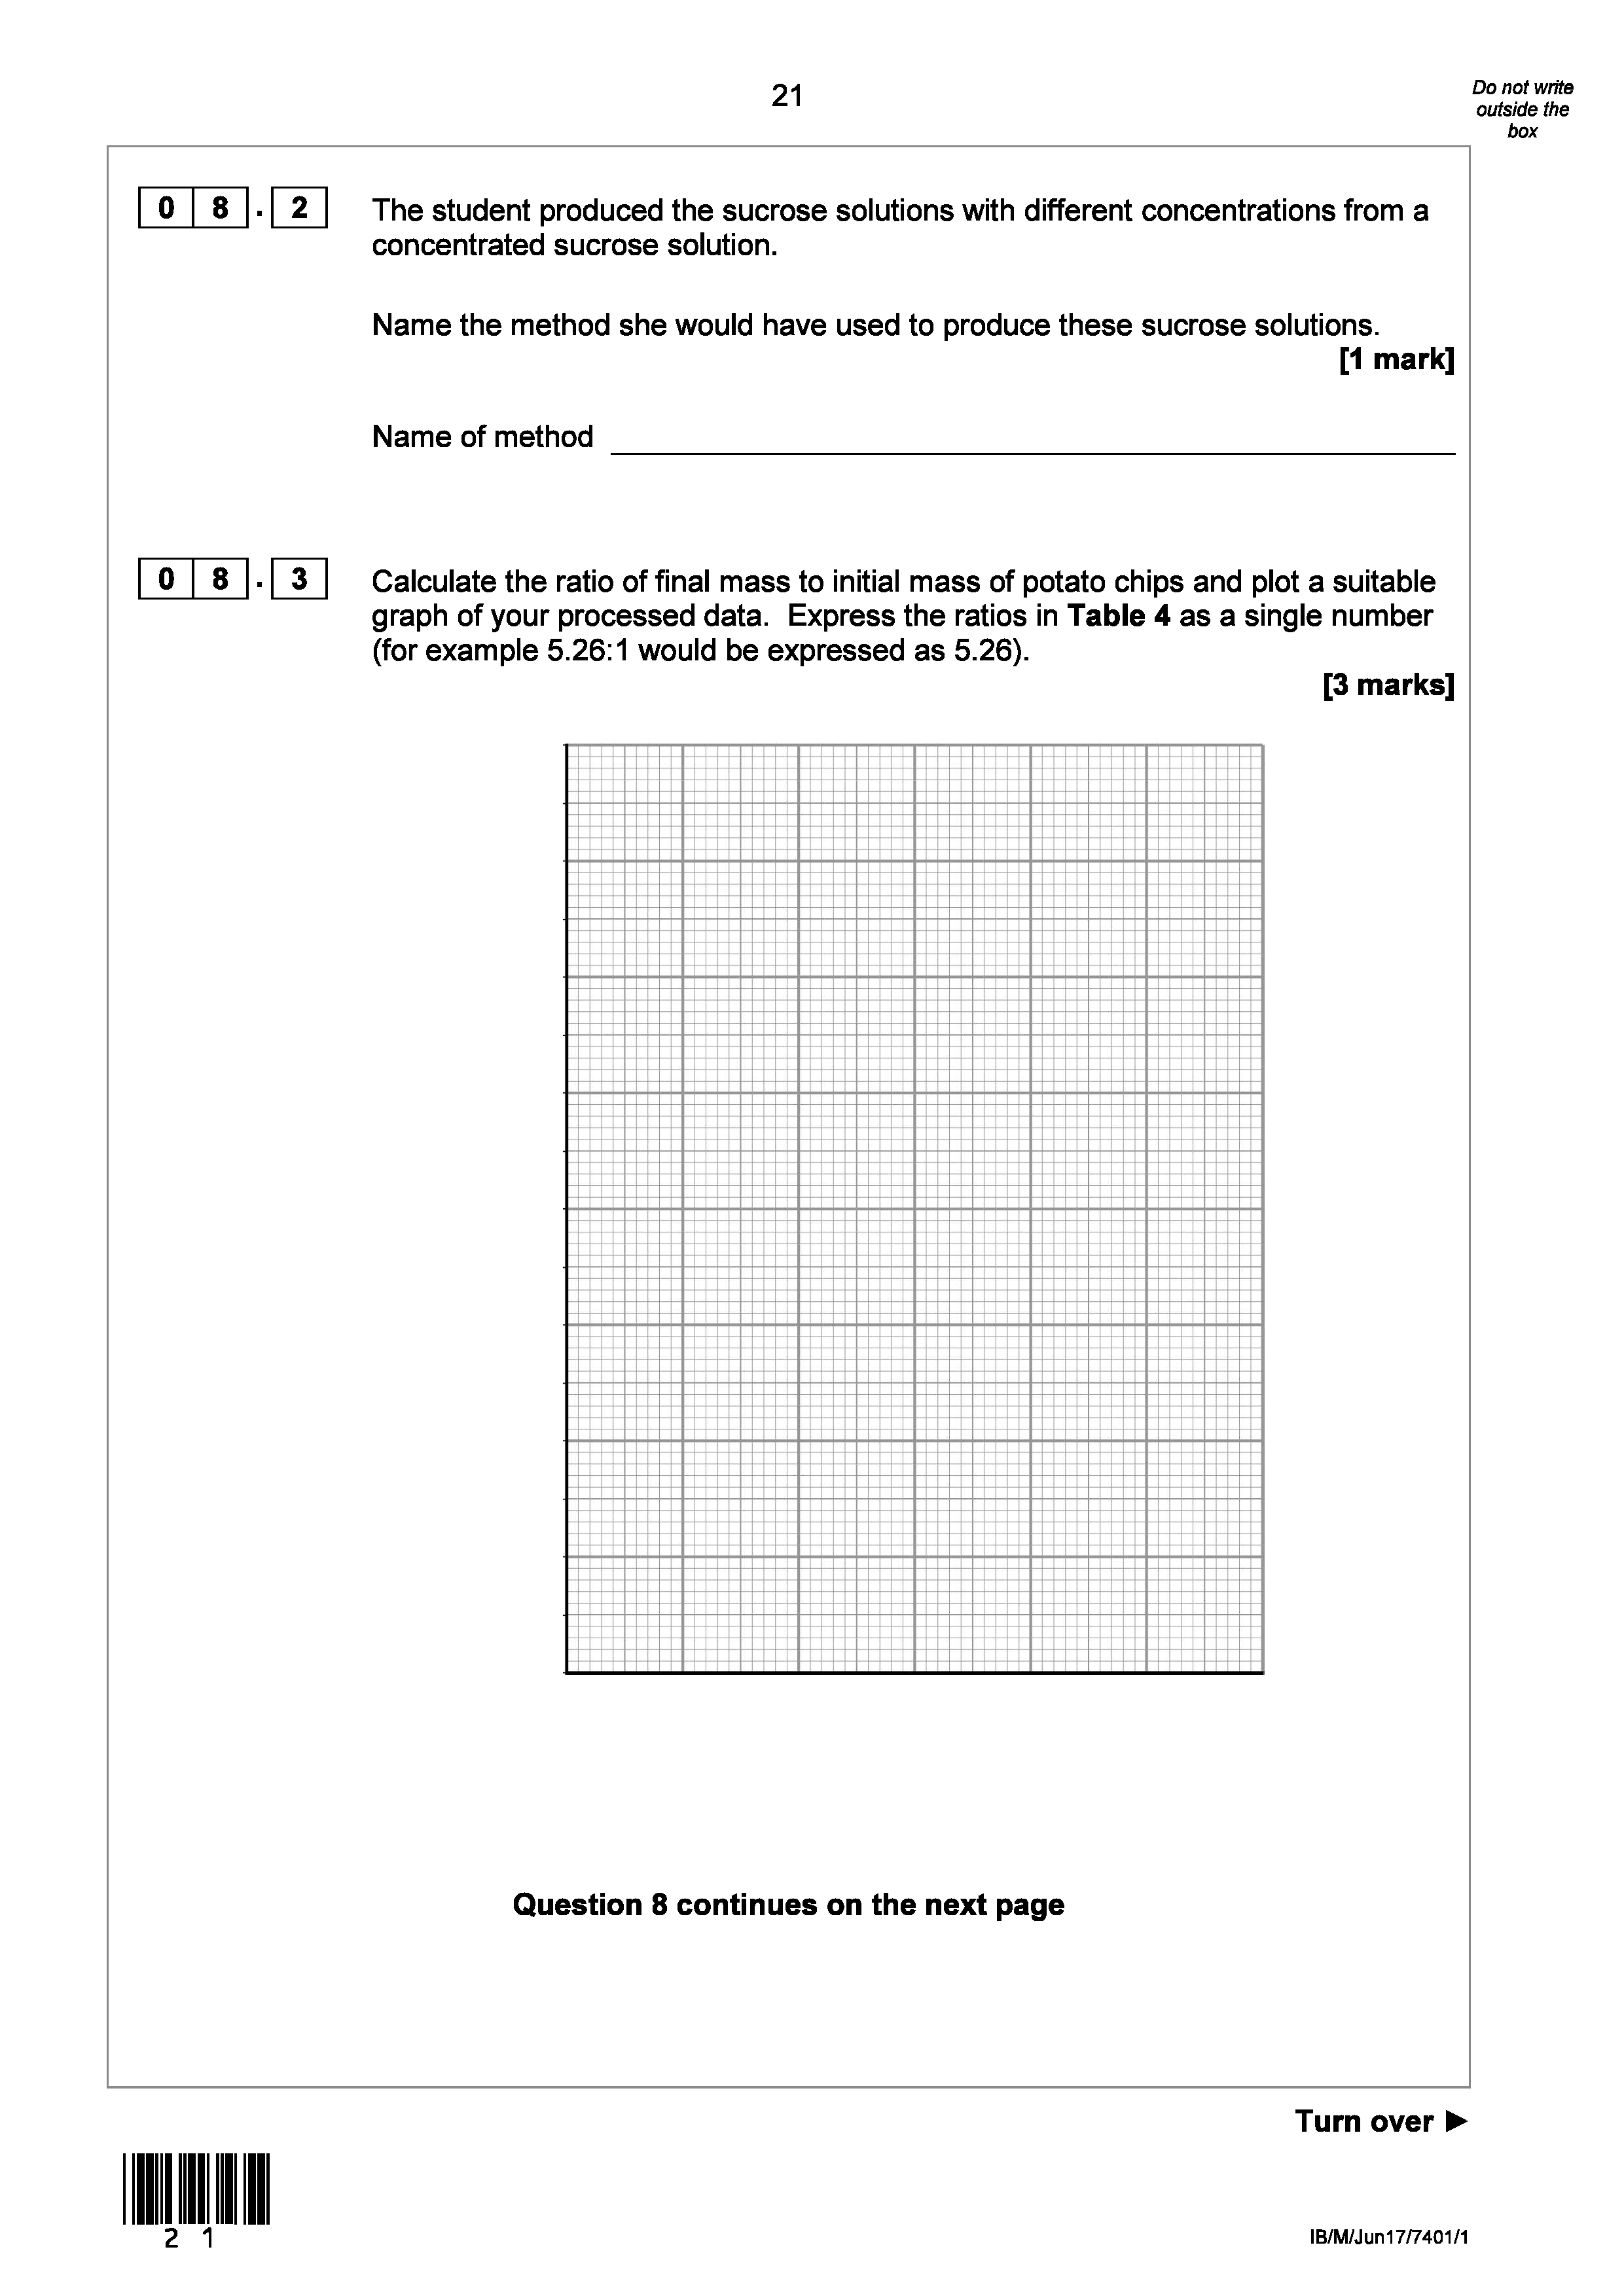 calculationquestionsAQA_Page_15.png